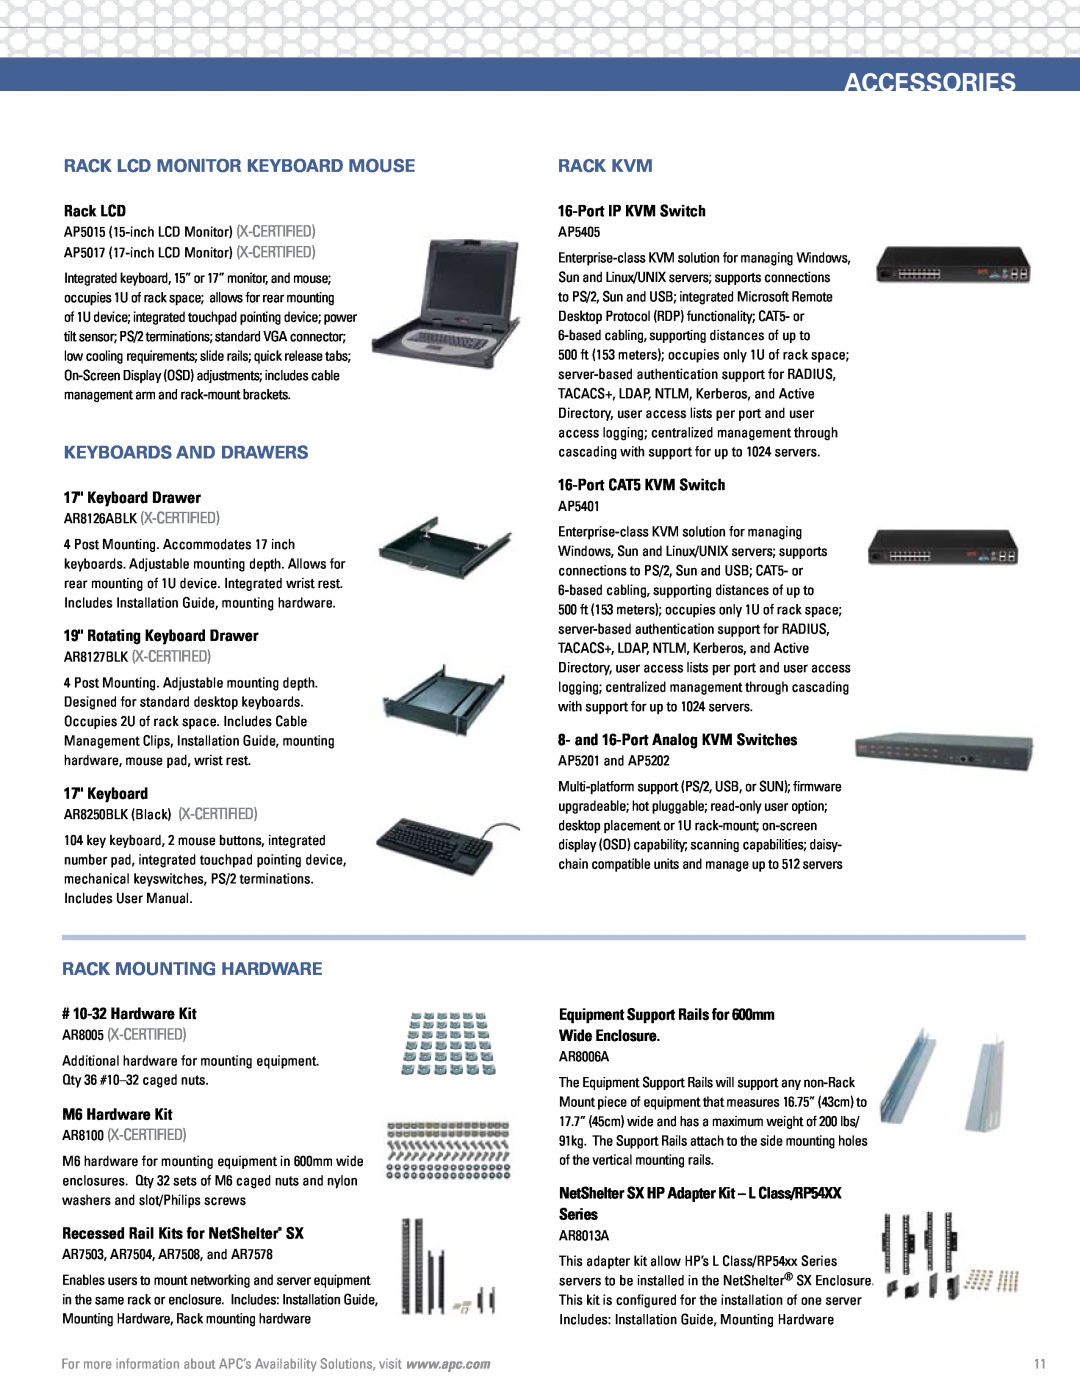 APC Rack Systems Accessories, Rack LCD Monitor keyboard mouse, keyboards and drawers, Rack kvm, rack mounting Hardware 